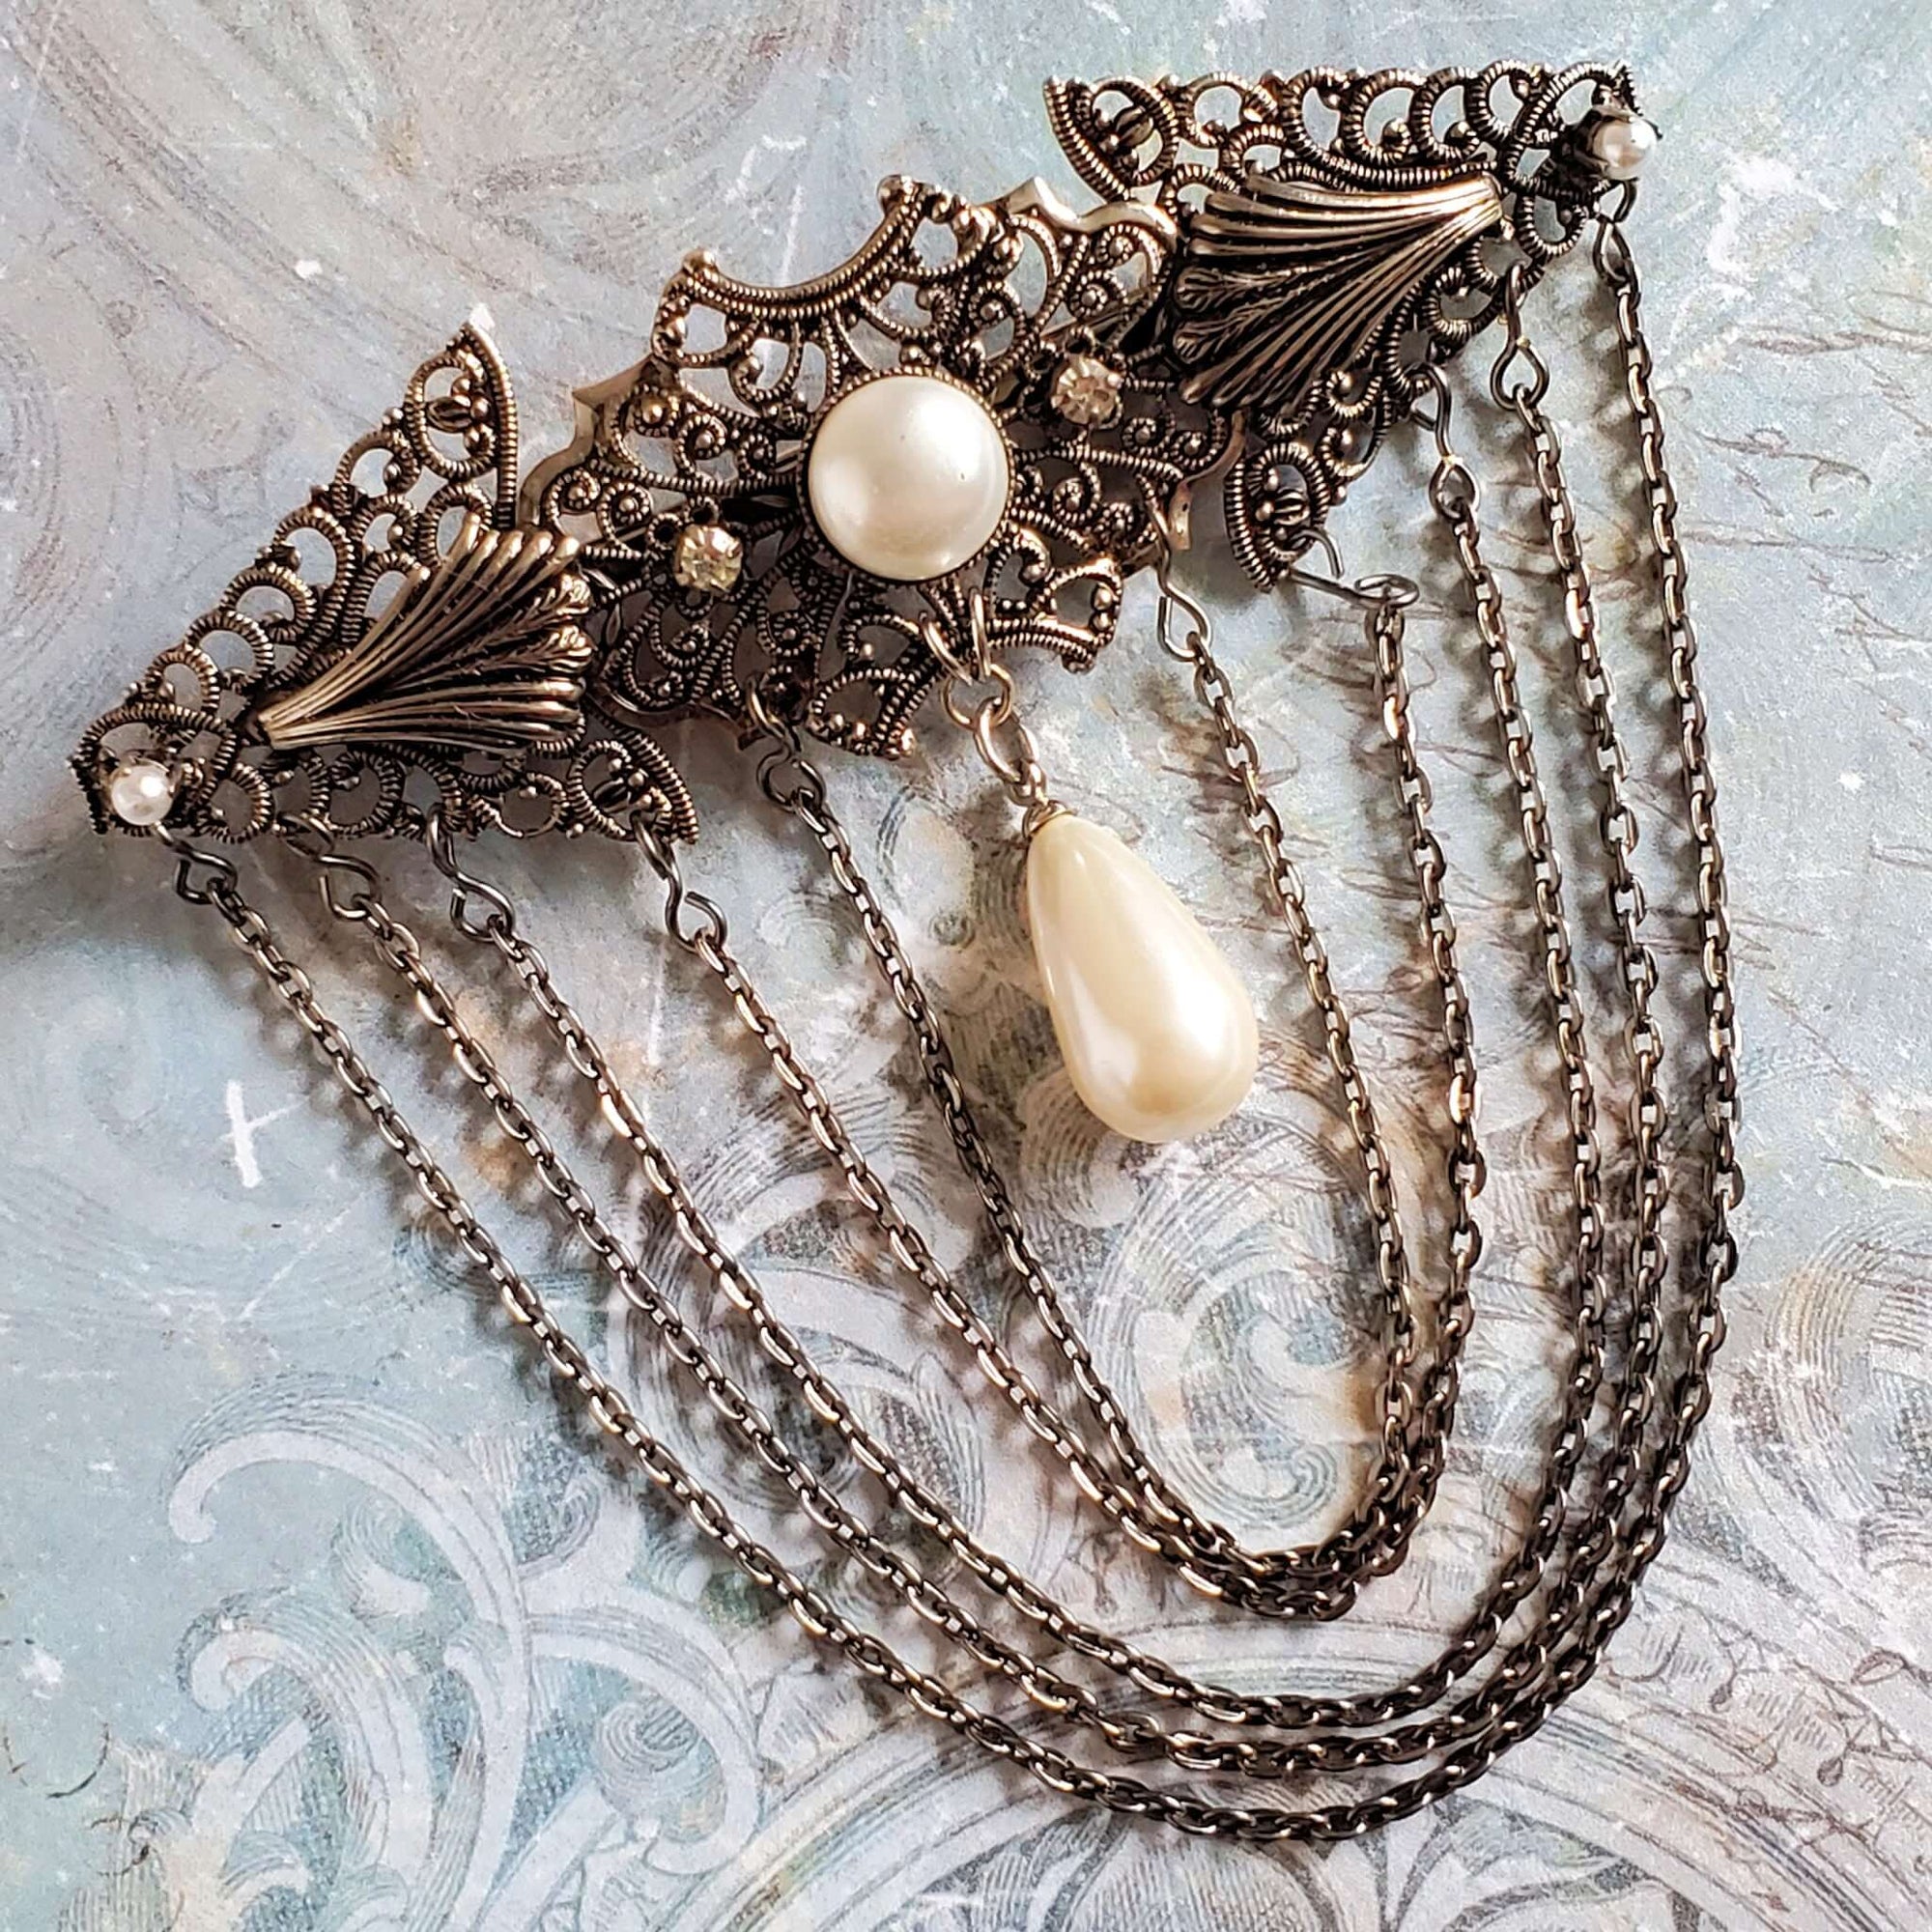 Large Victorian Style Statement Brooch